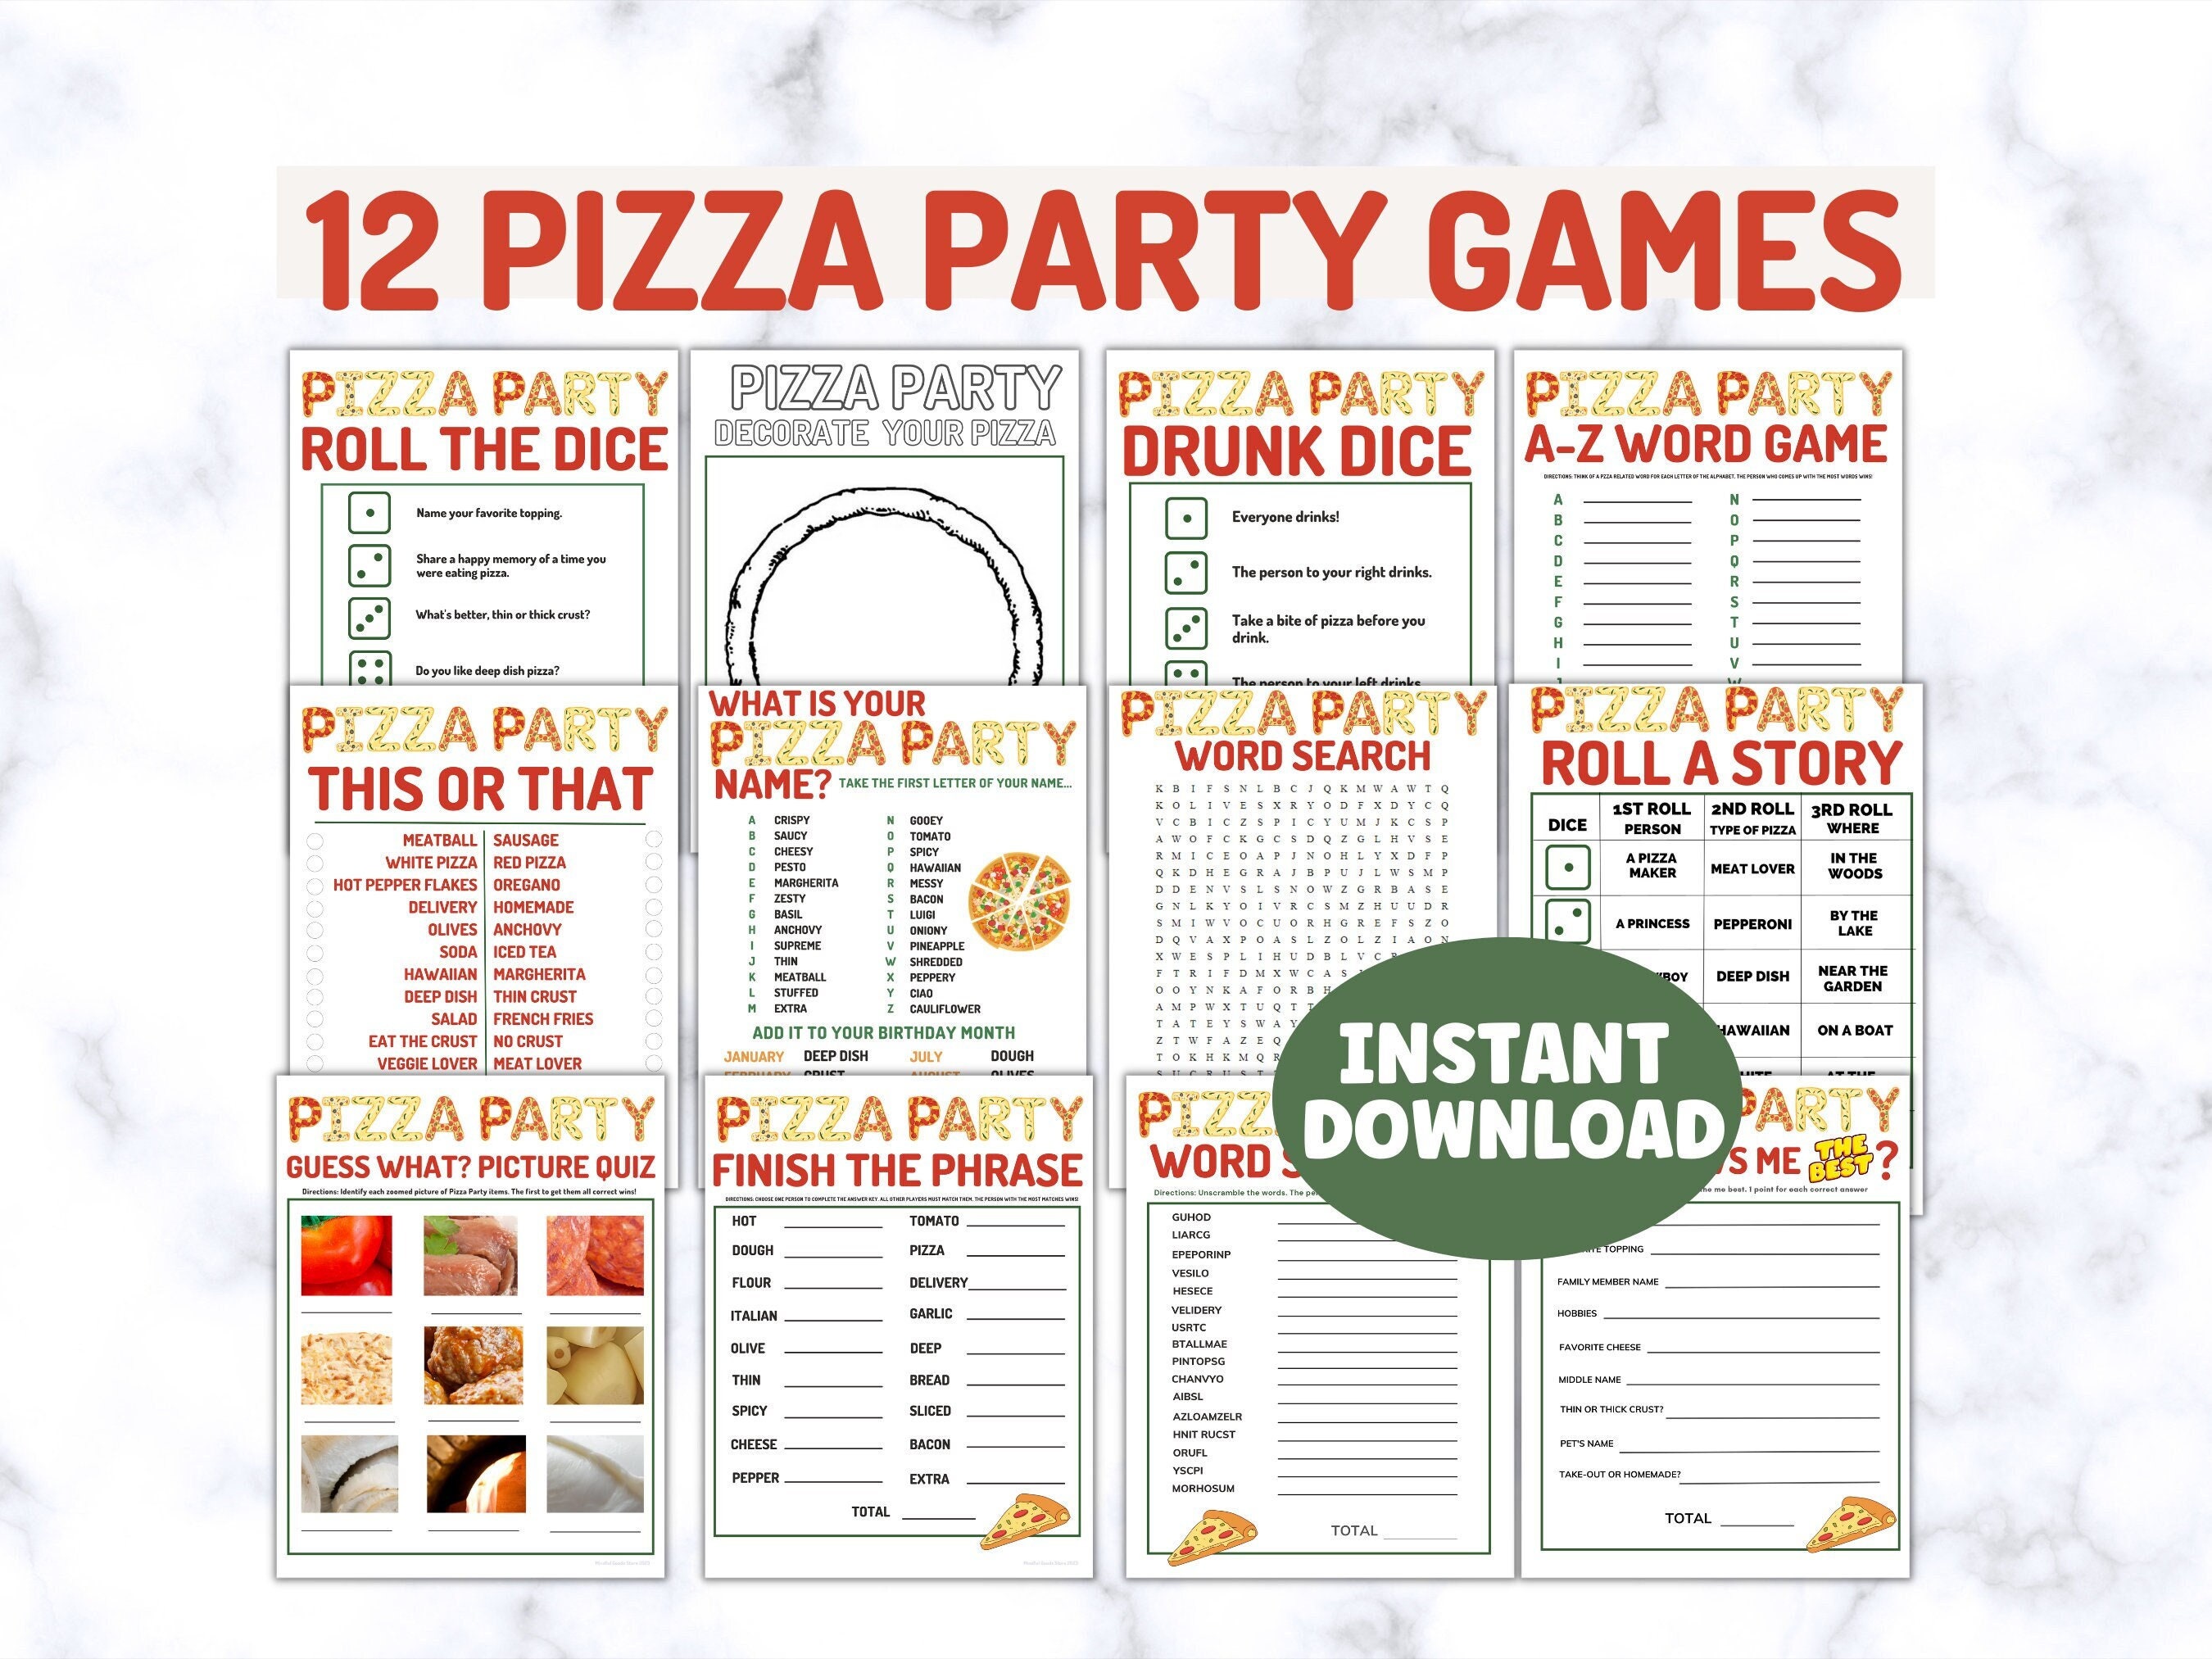 Pizza Party Ideas For Game Day!